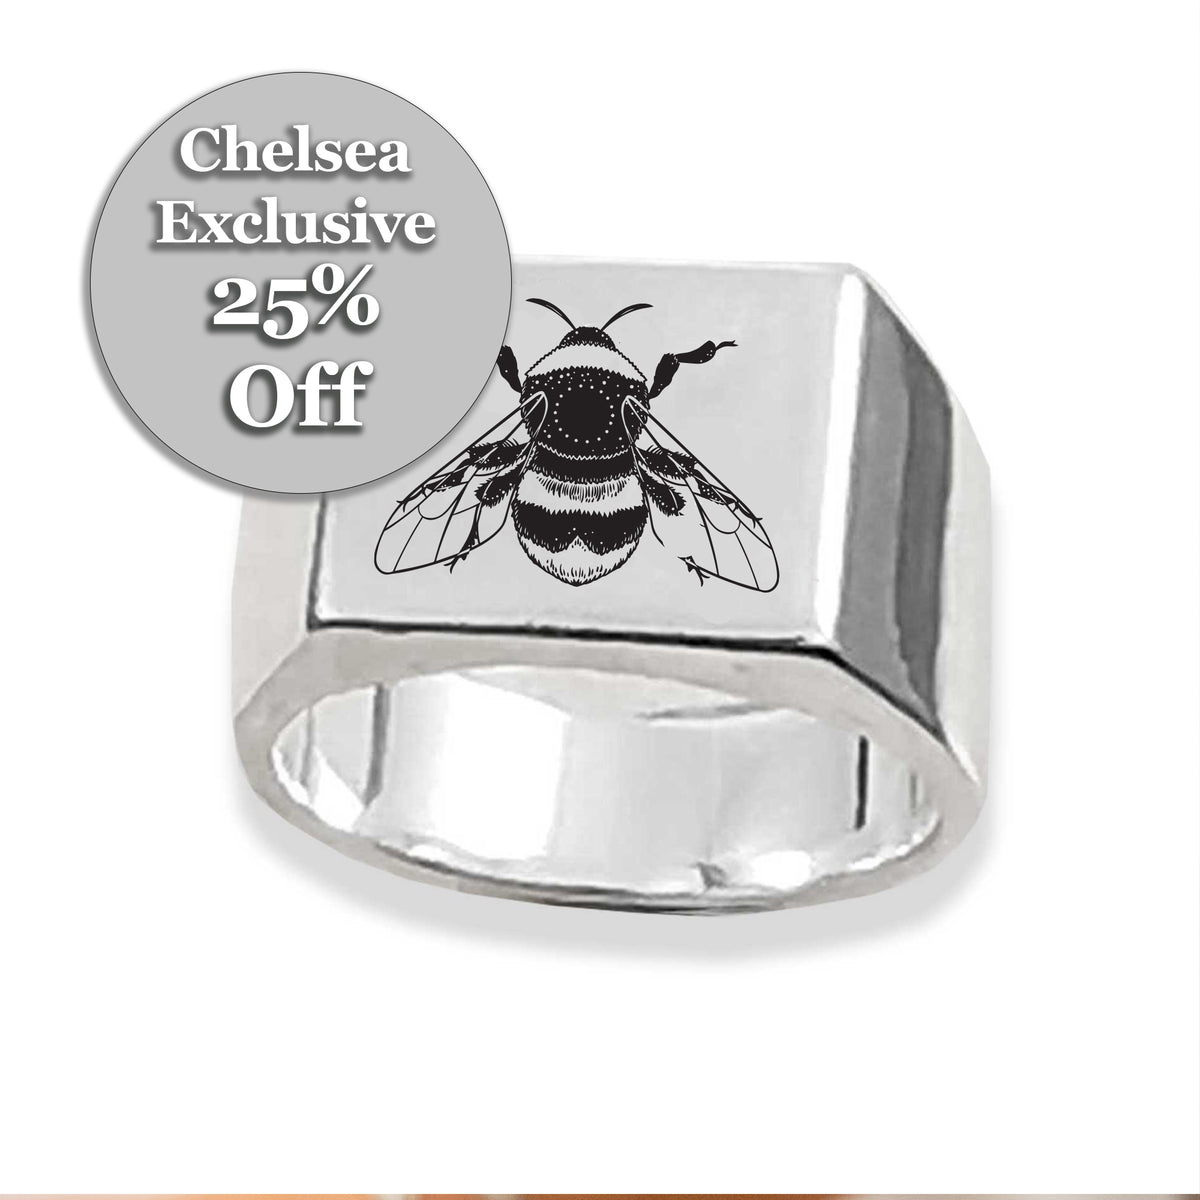 Bee signet ring - Large Square